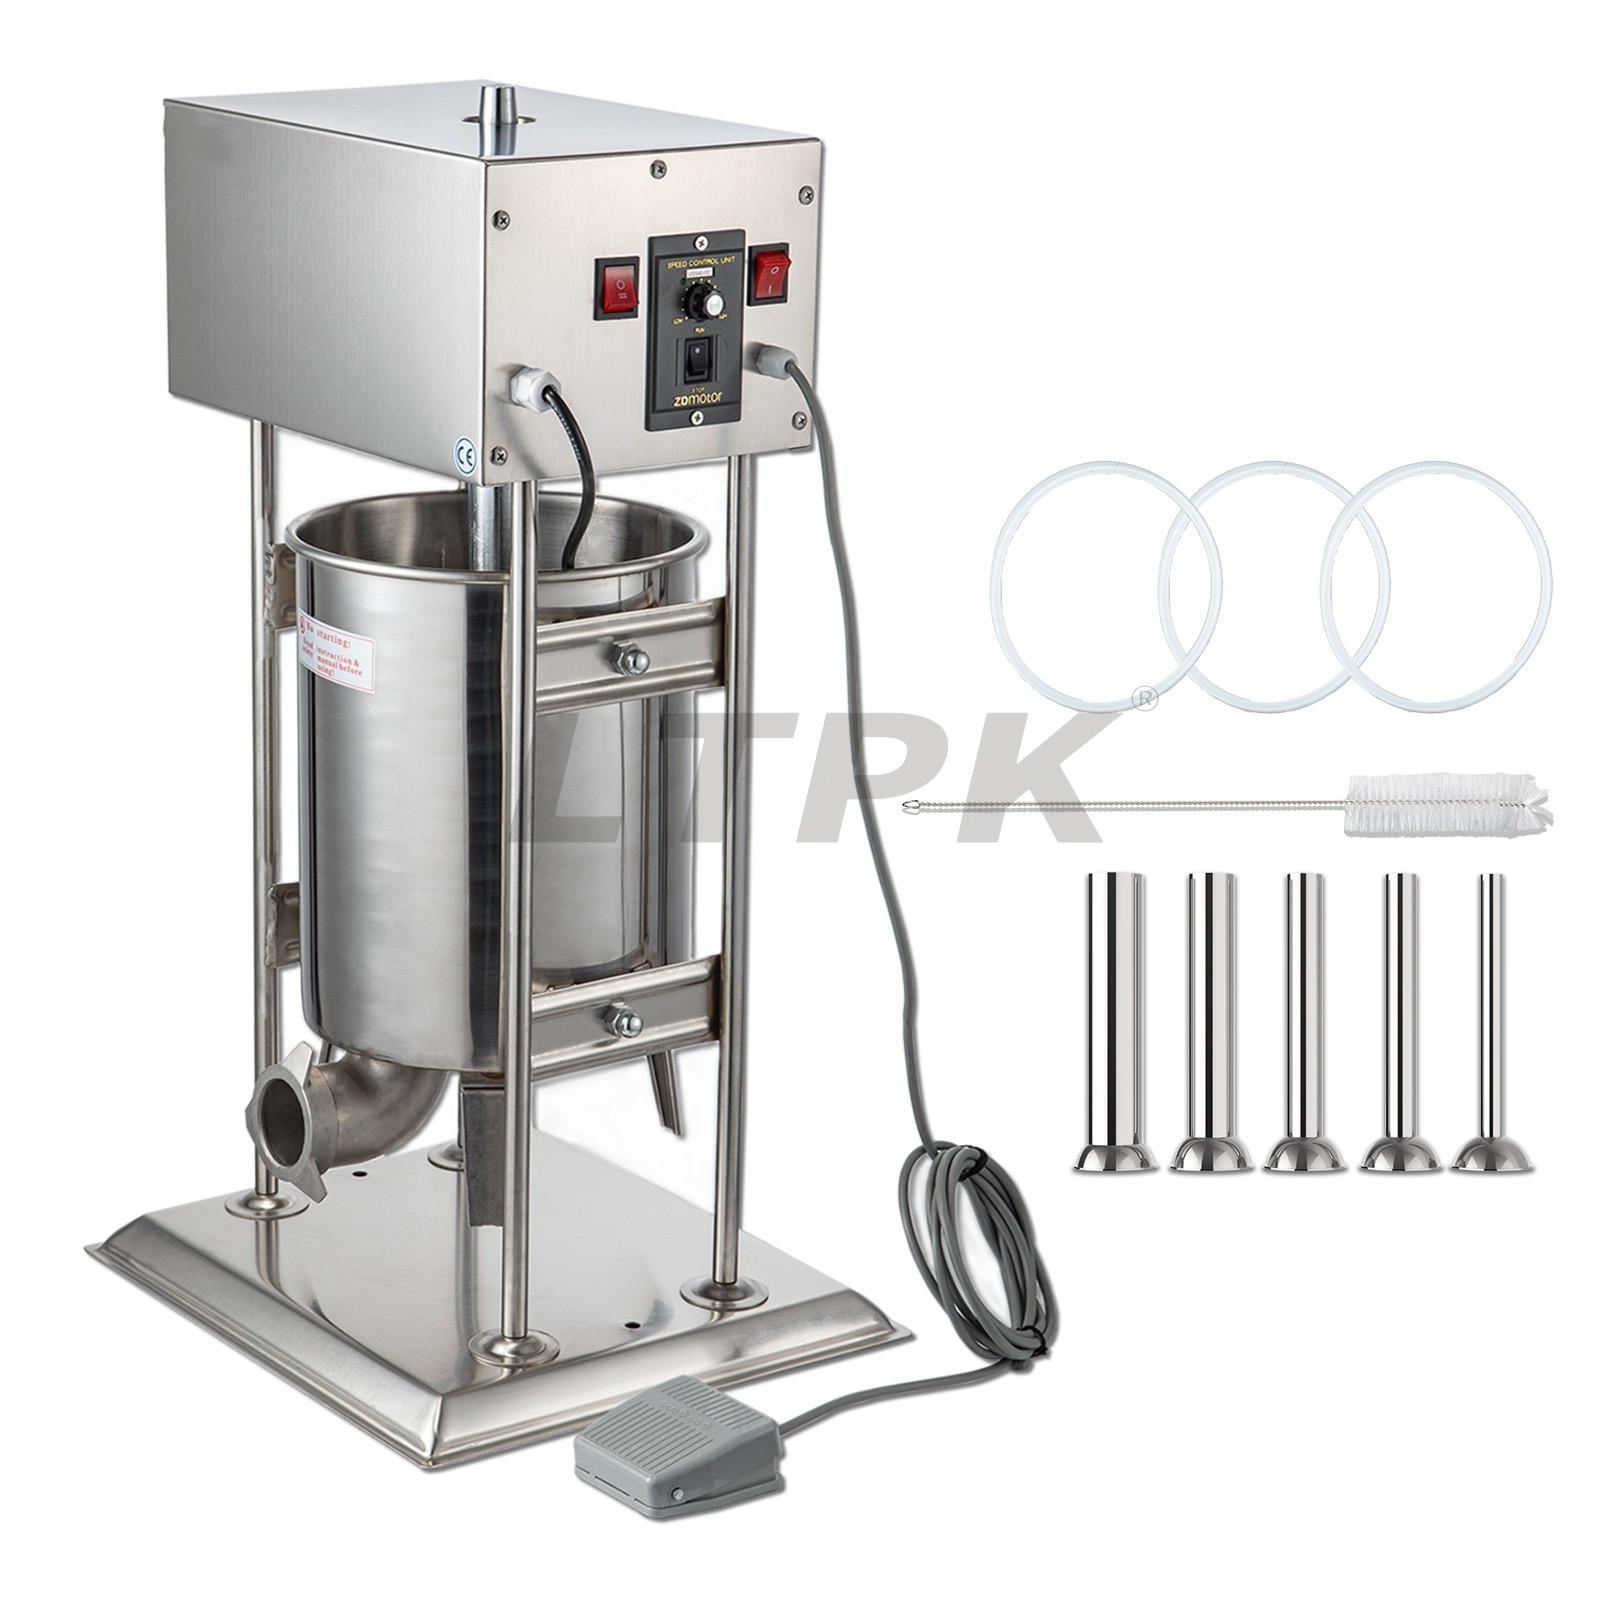 15L Automatic Sausages Maker Machine with 4 Filling Funnels